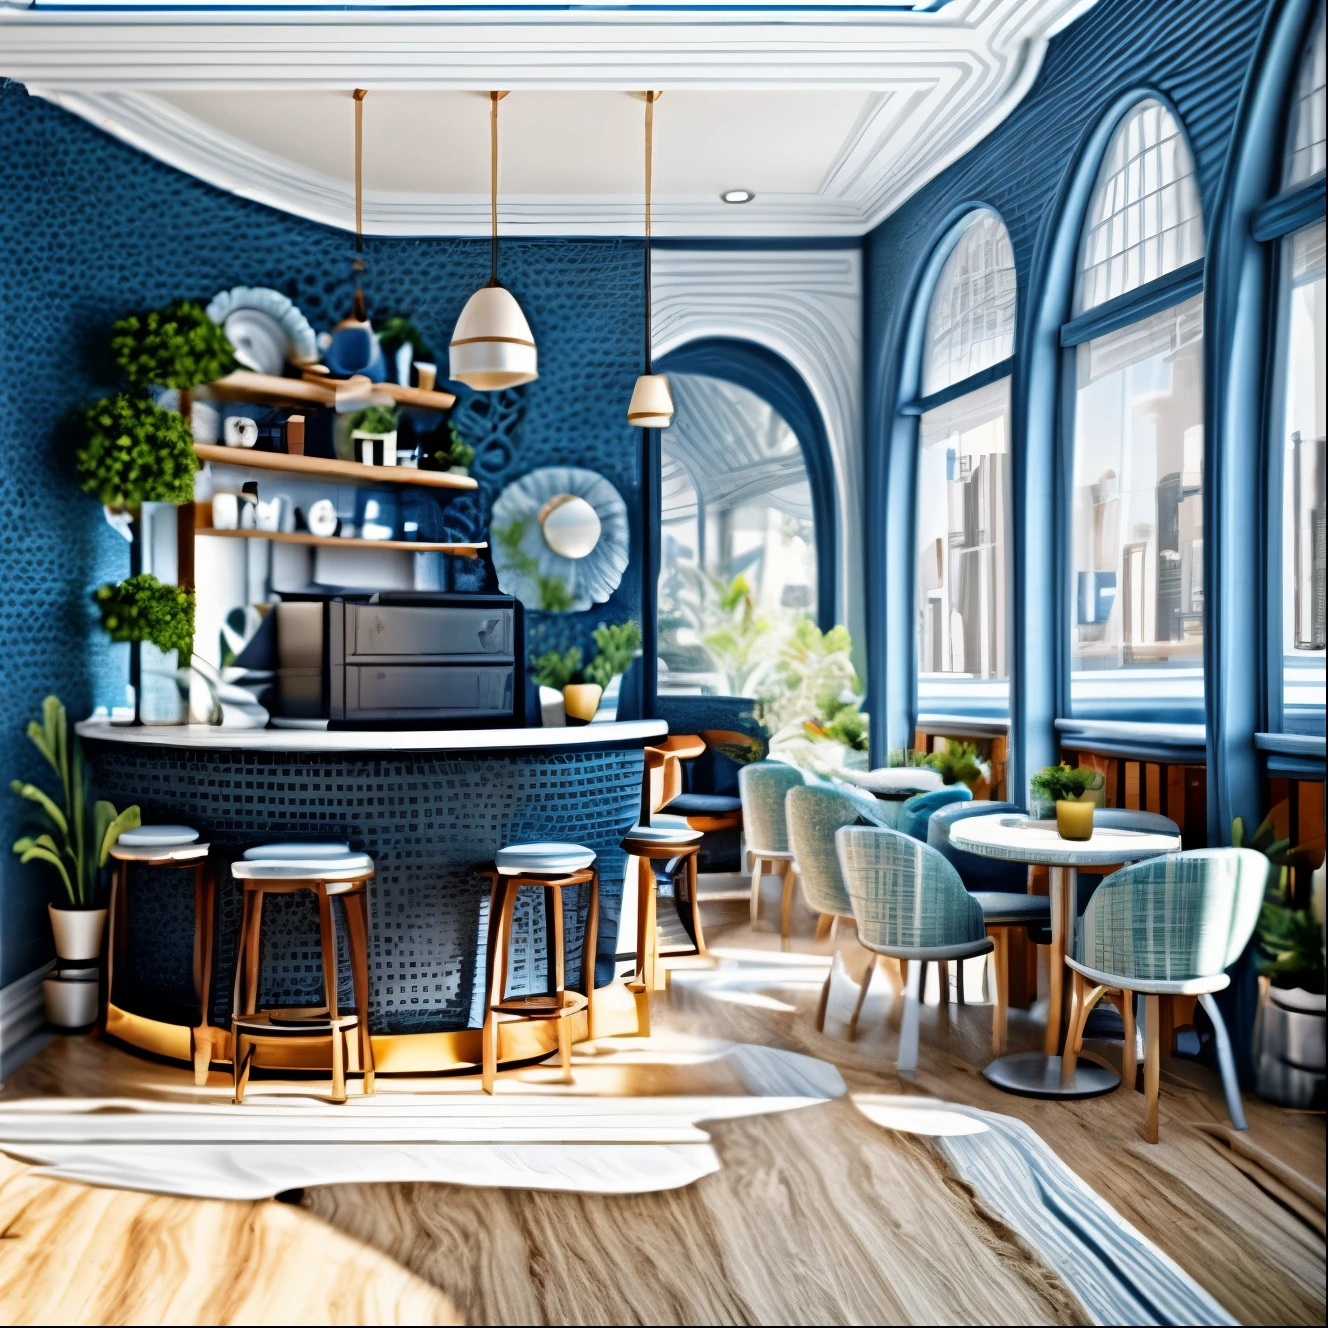 The coffee shop space has black tones, black iron tables and chairs, rough black walls, and luxurious mirrors, Minimalism,  black themes, modern sci-fi